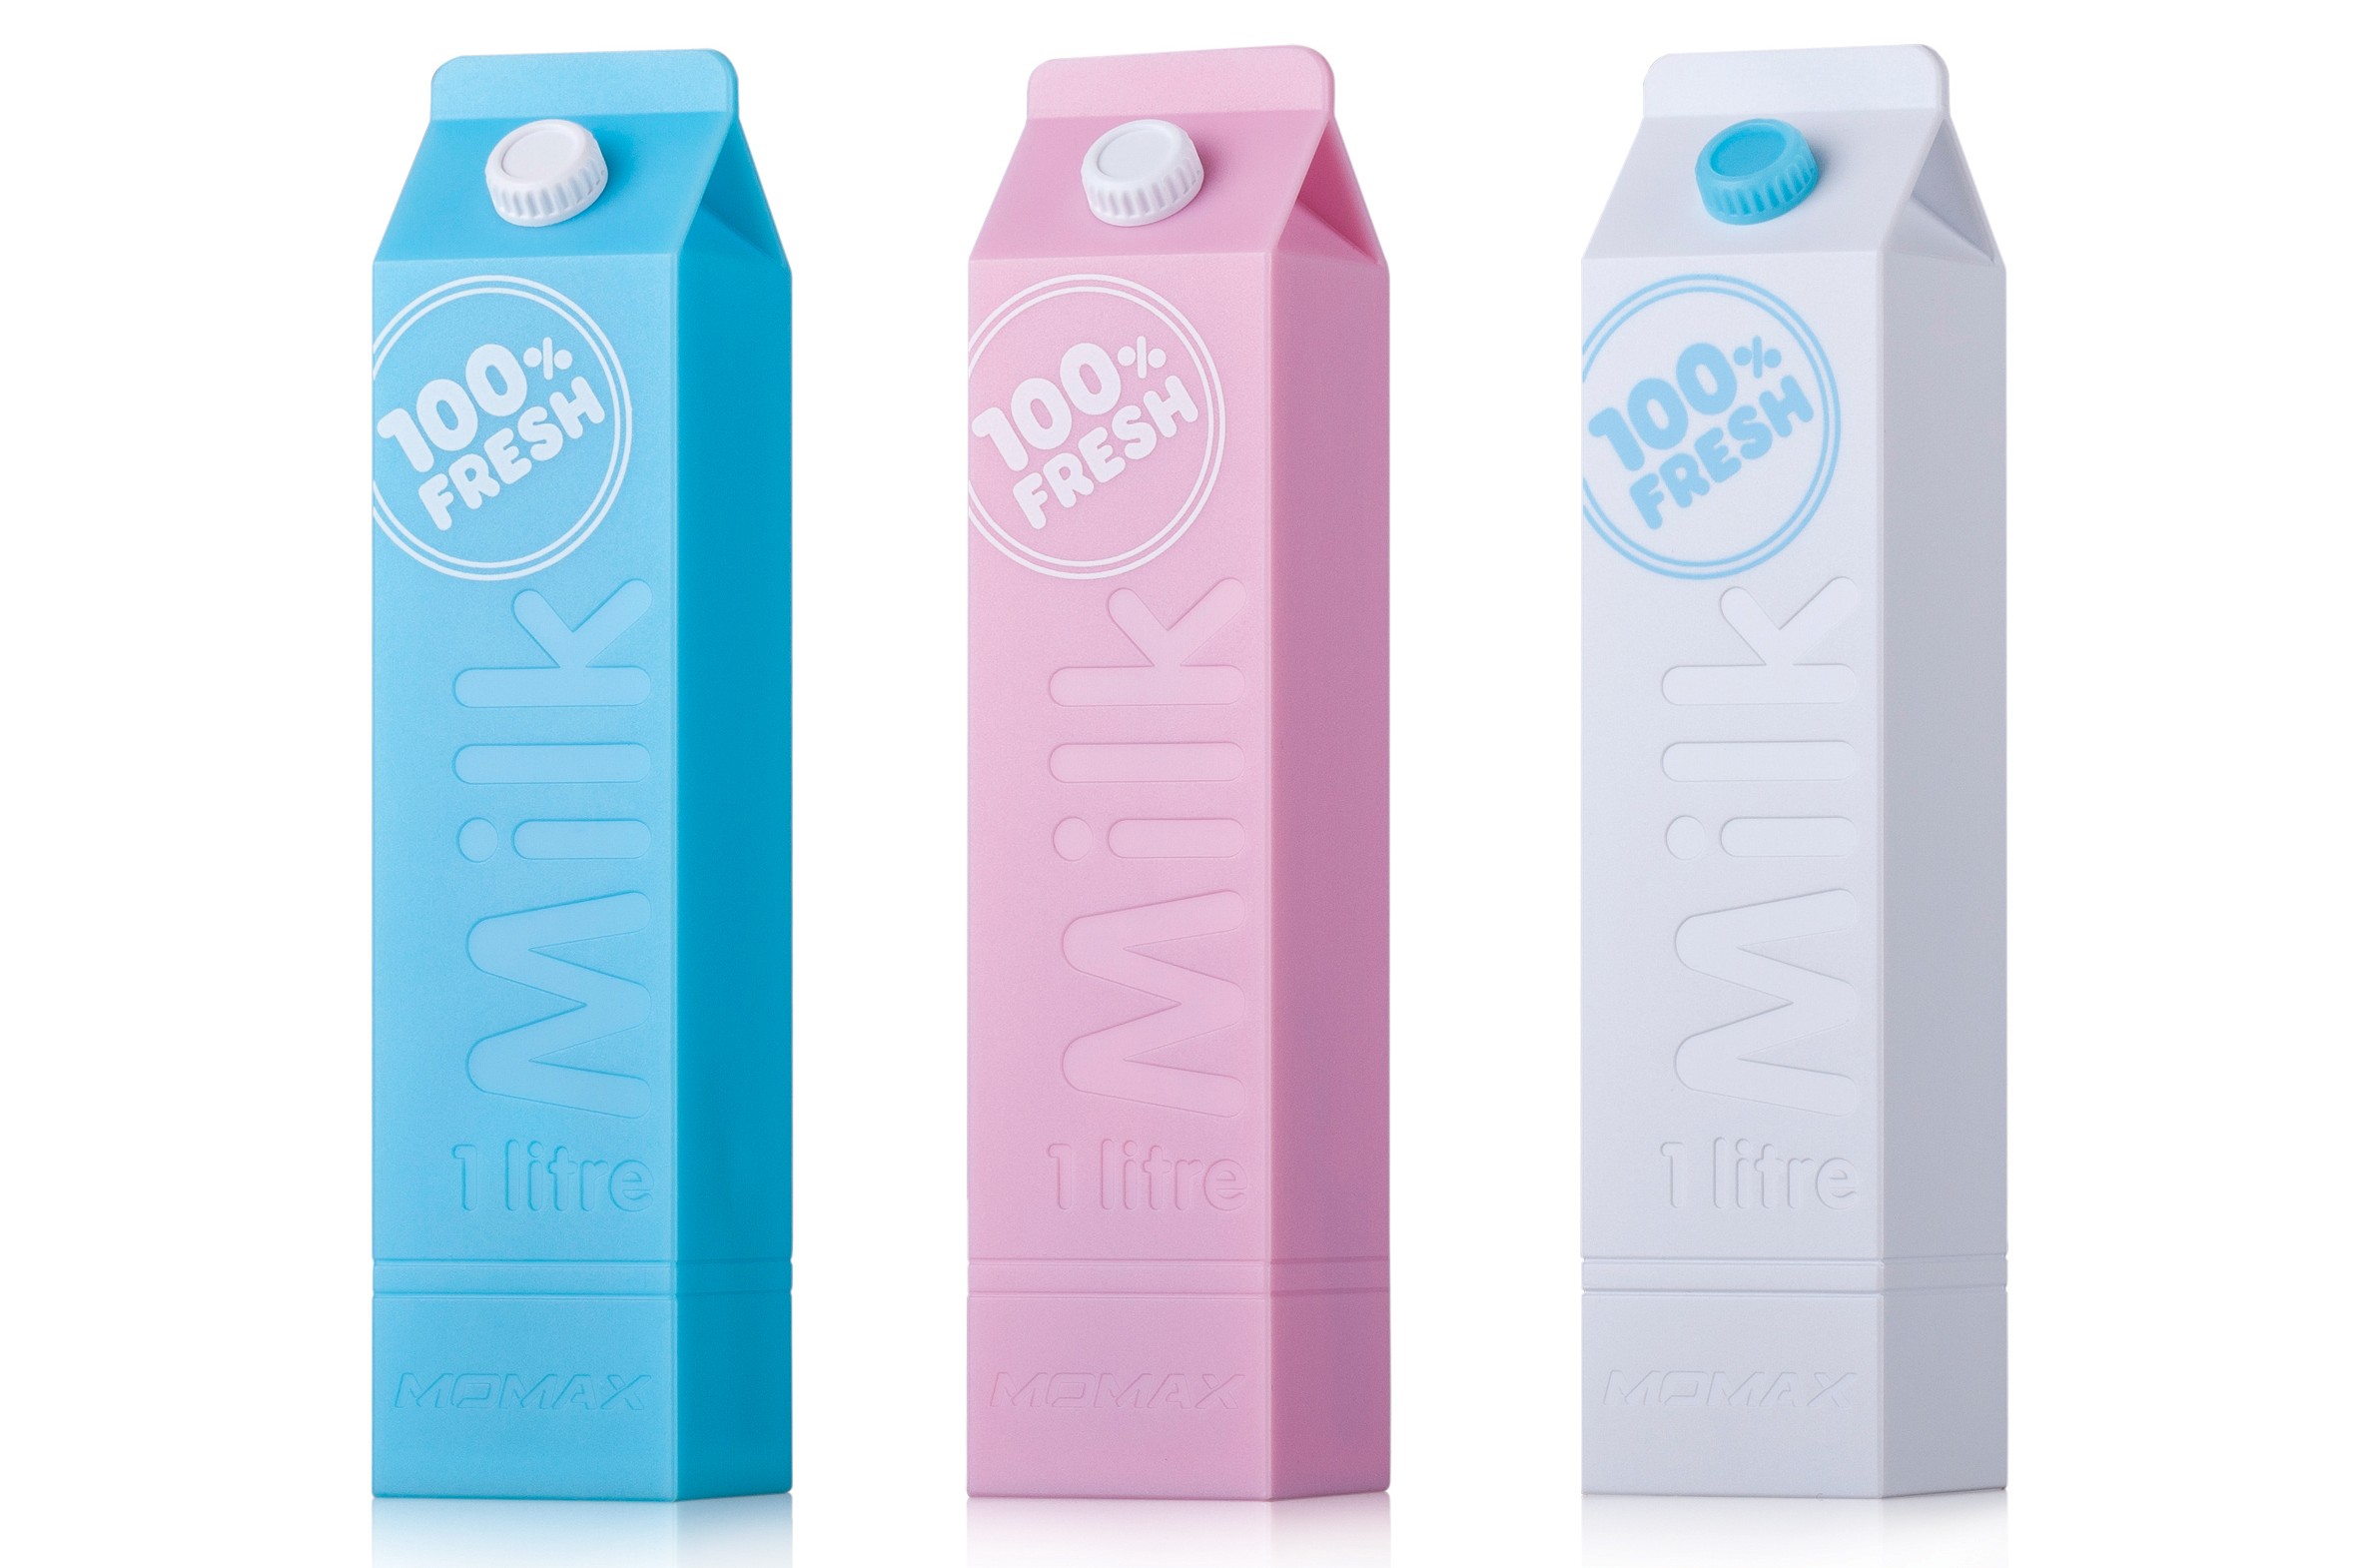 Power Milk 3, a USB battery backup box with juice for your phone.